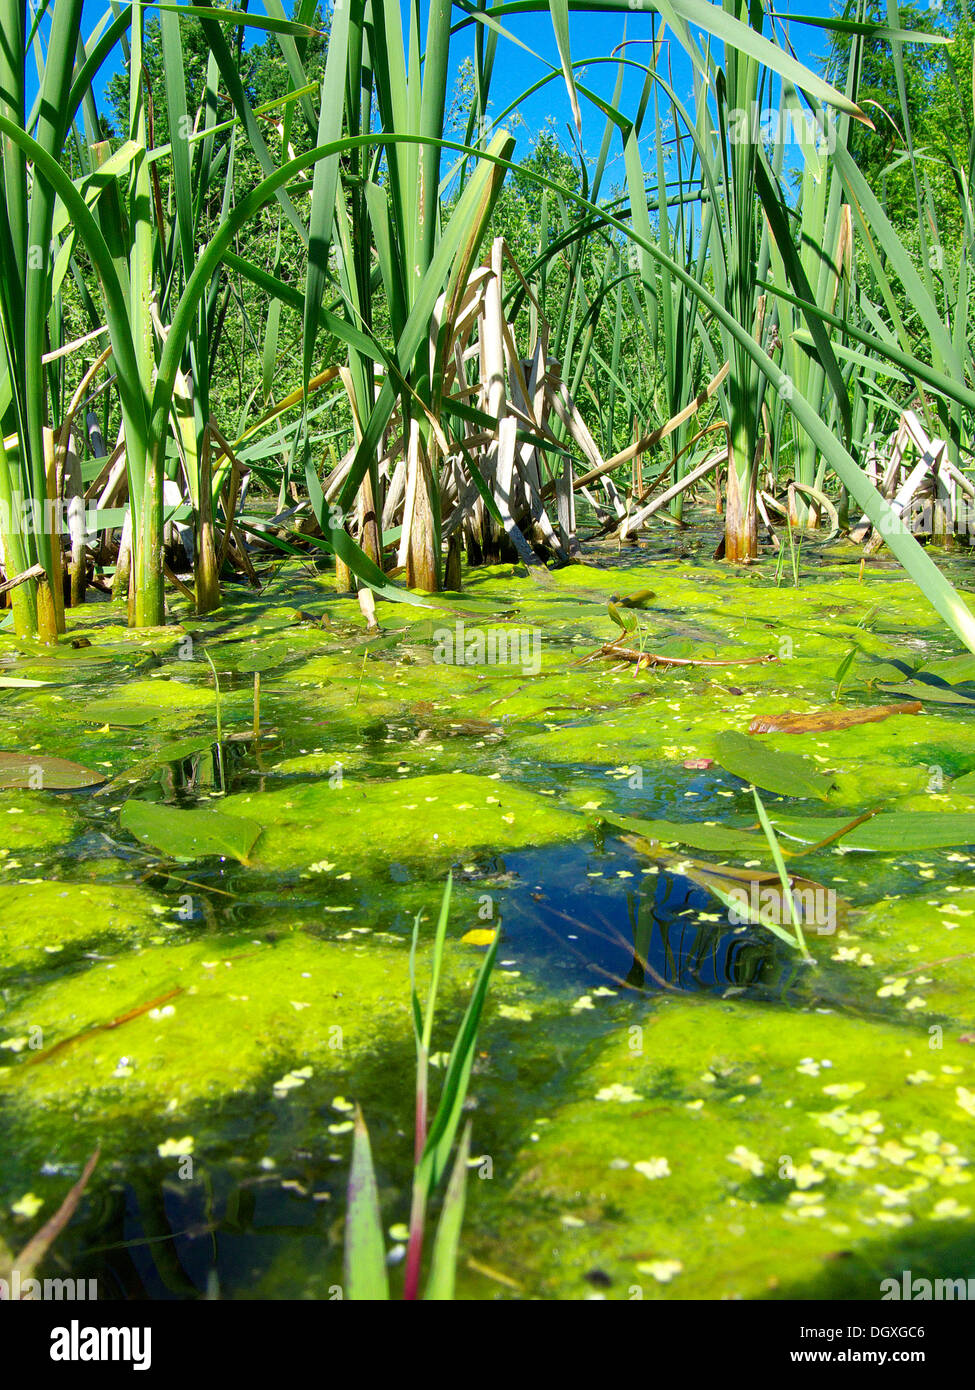 Carpet of algae in a pond, reeds at back Stock Photo